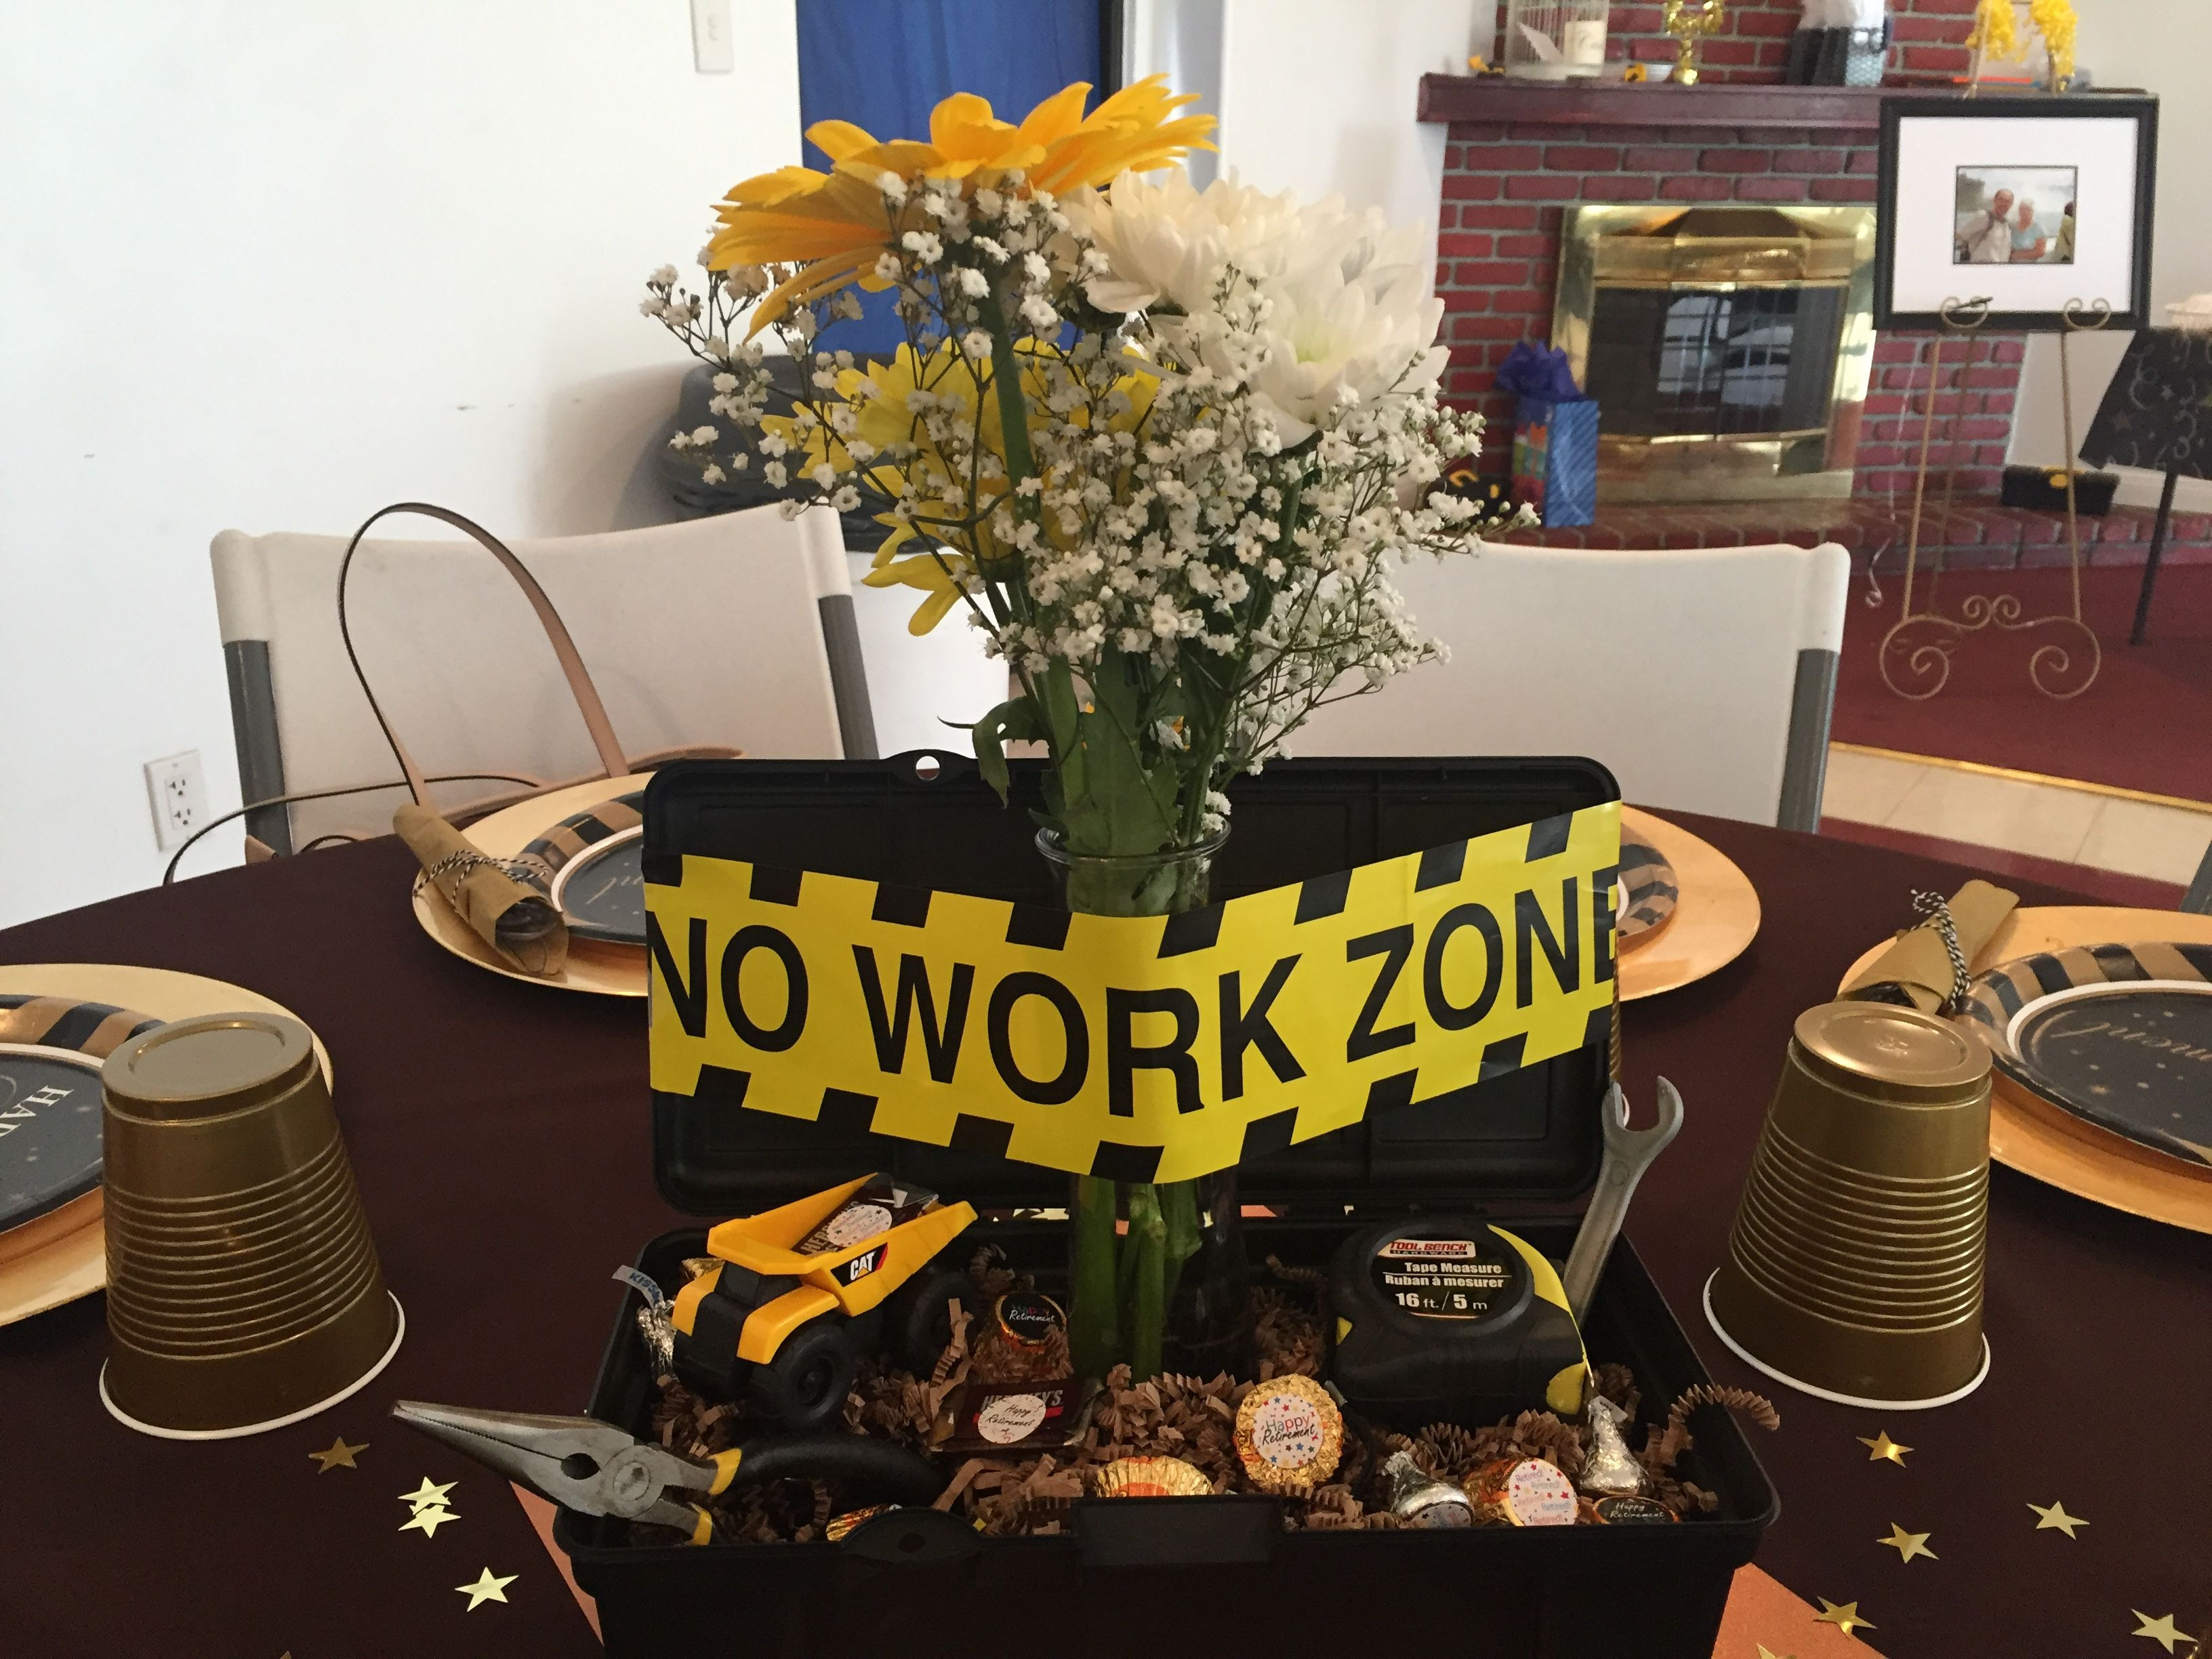 Retirement Party Decorations Ideas
 I couldn t find a retirement party centerpiece for a